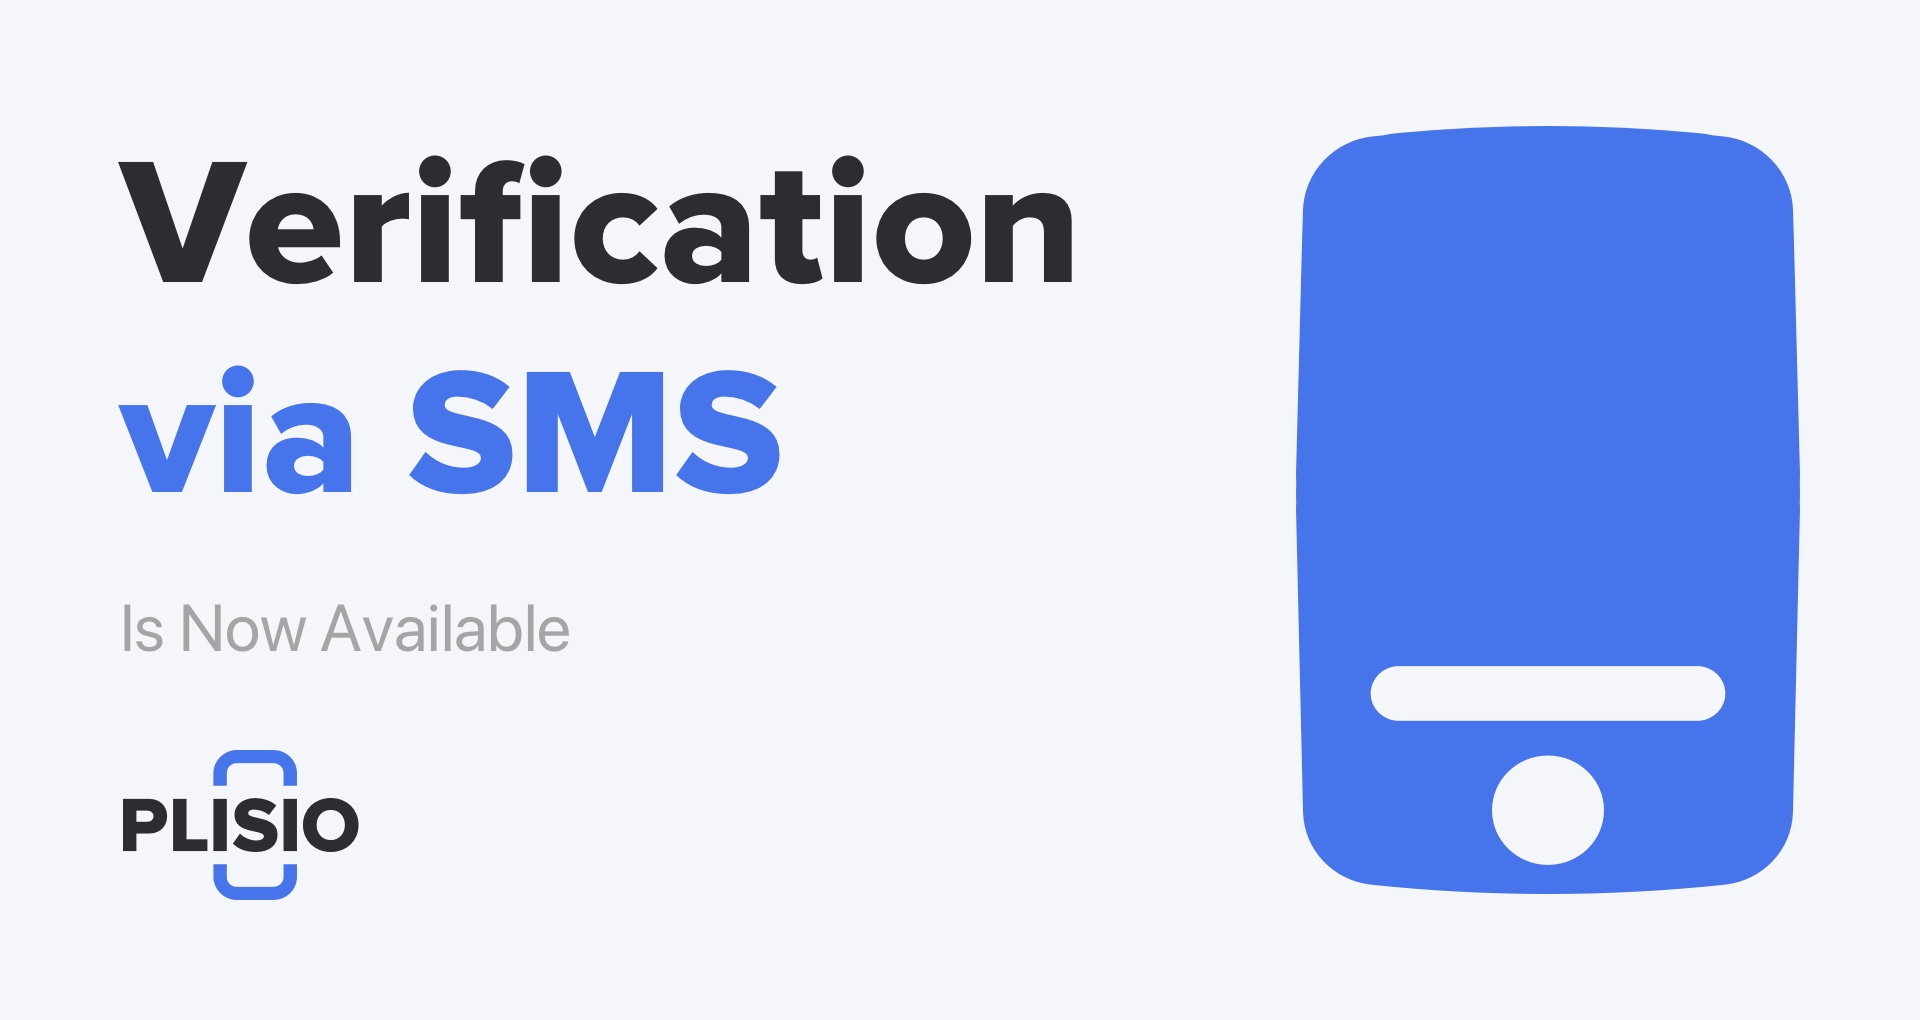 SMS Verification is Now Available. Update Your Security Settings!